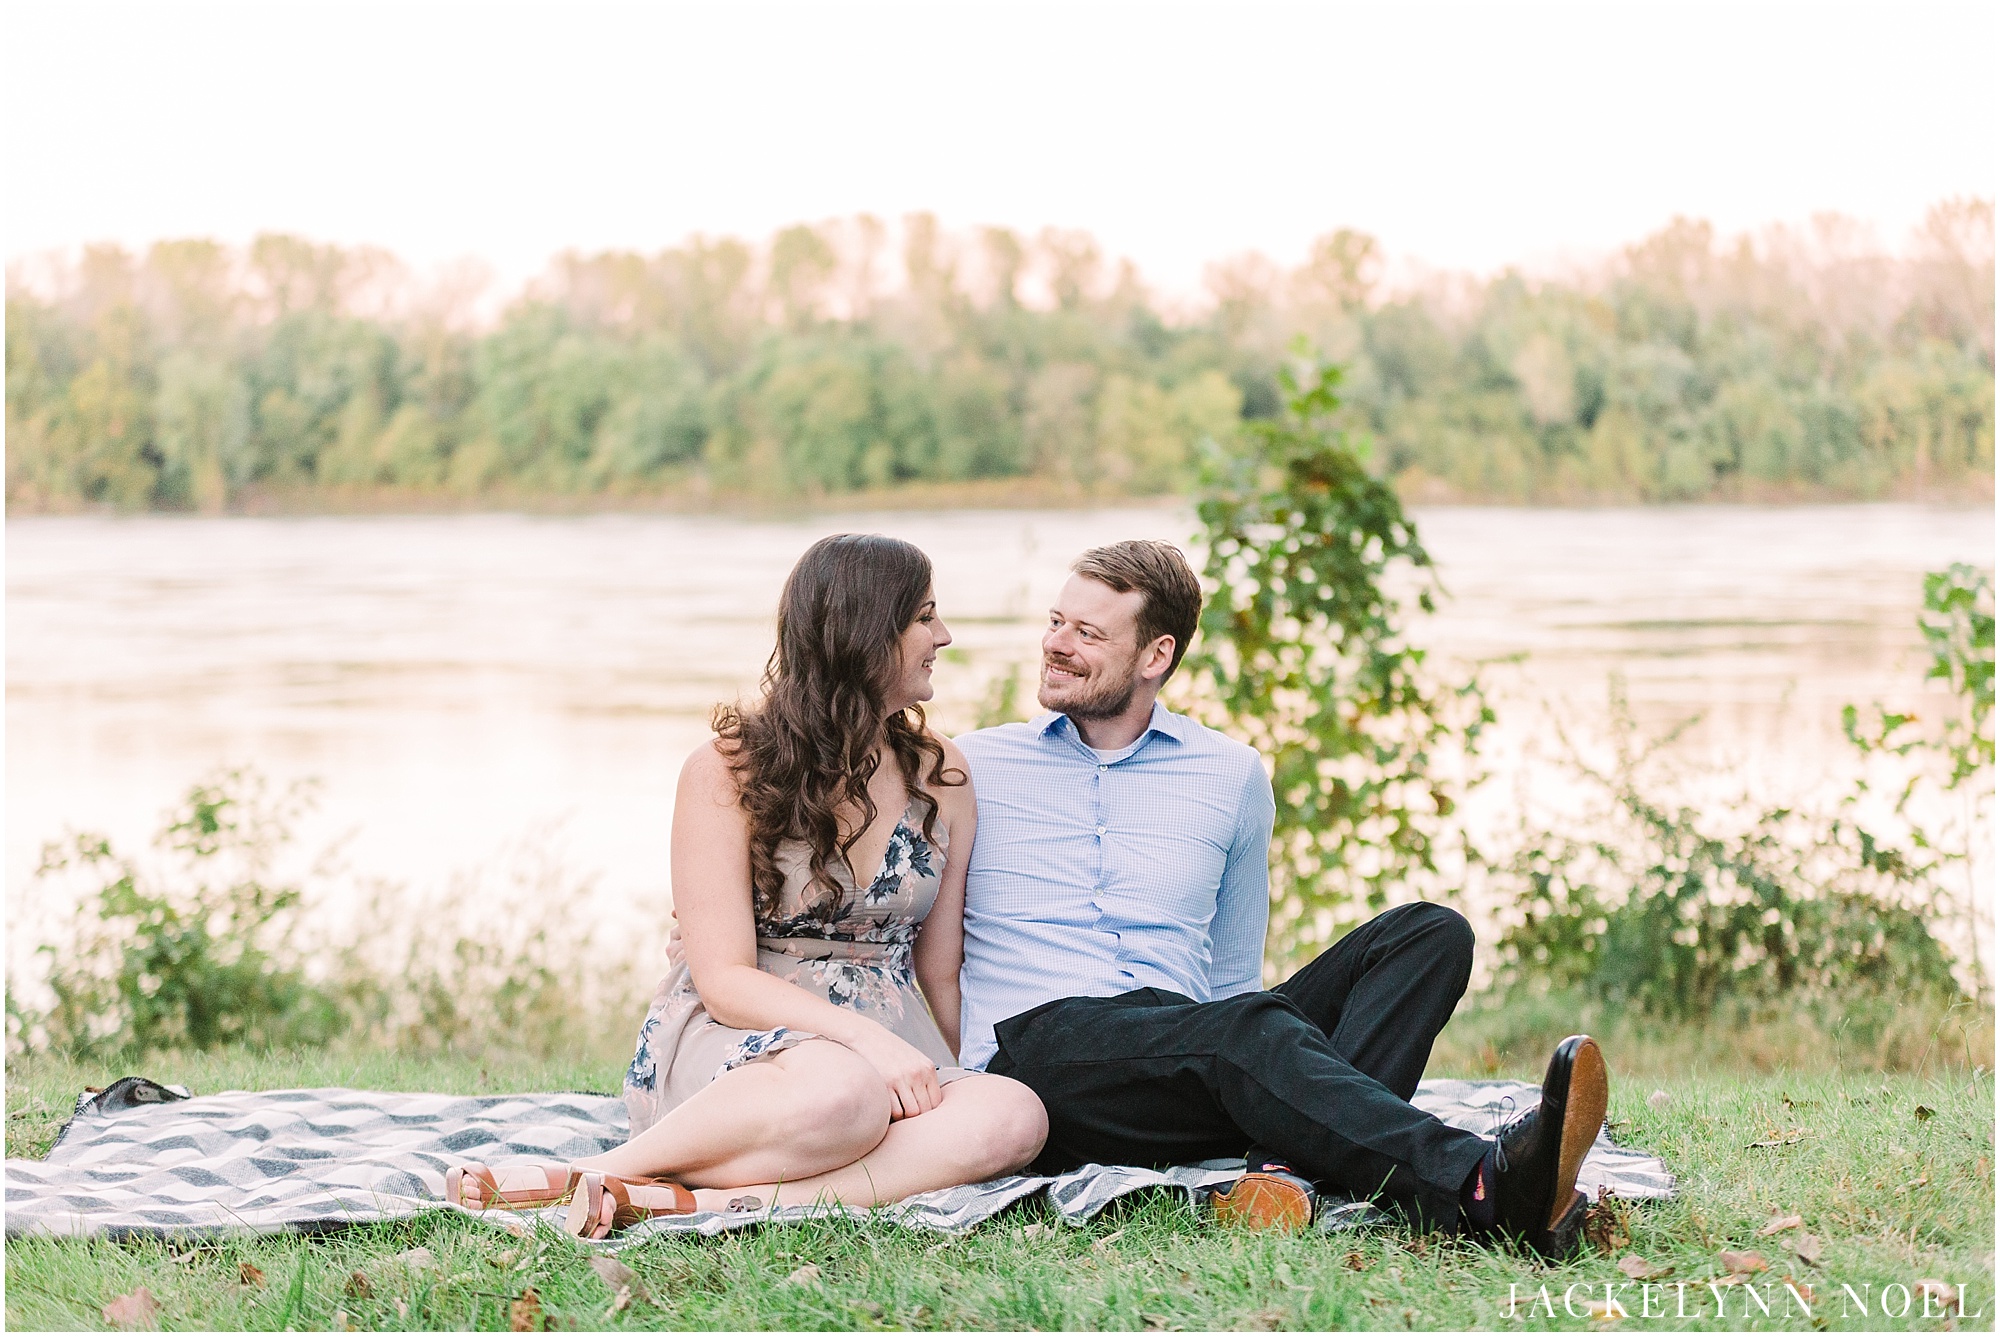 Danika & Joe engagement session at Fort Bell Fontaine by Jackelynn Noel Photography